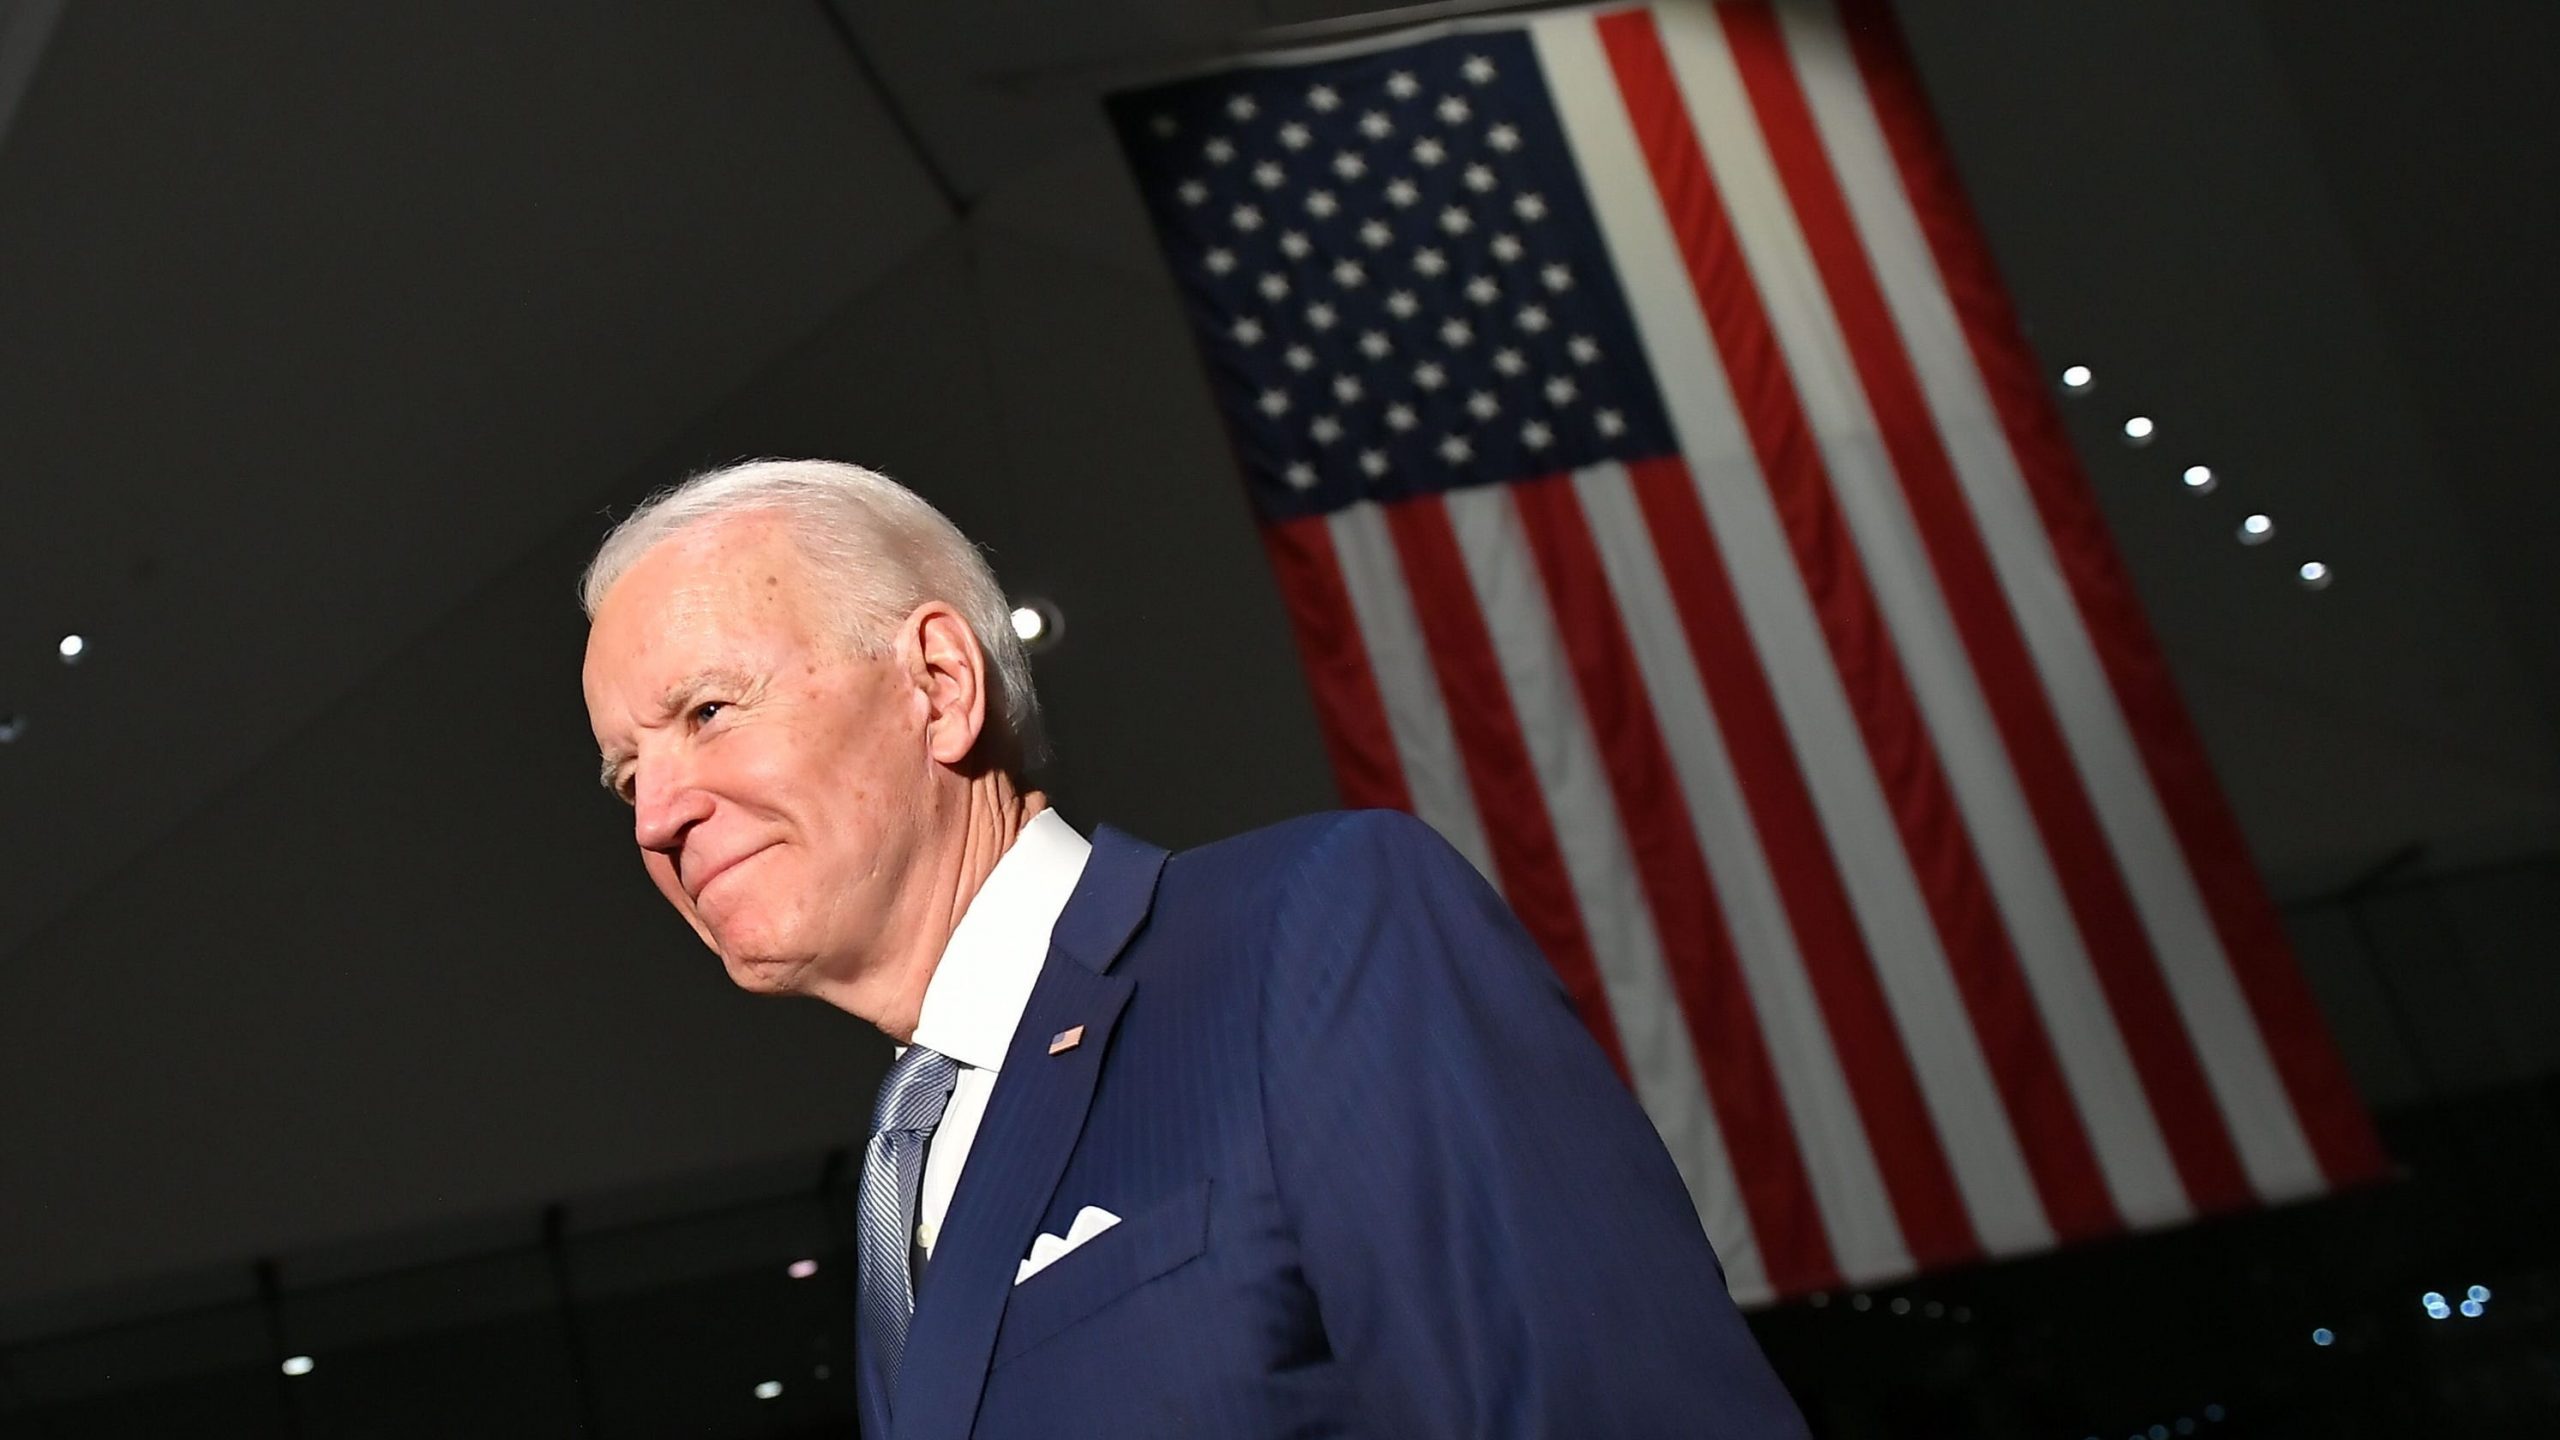 BREAKING! US President Biden Withdraws Re-elect Ambition